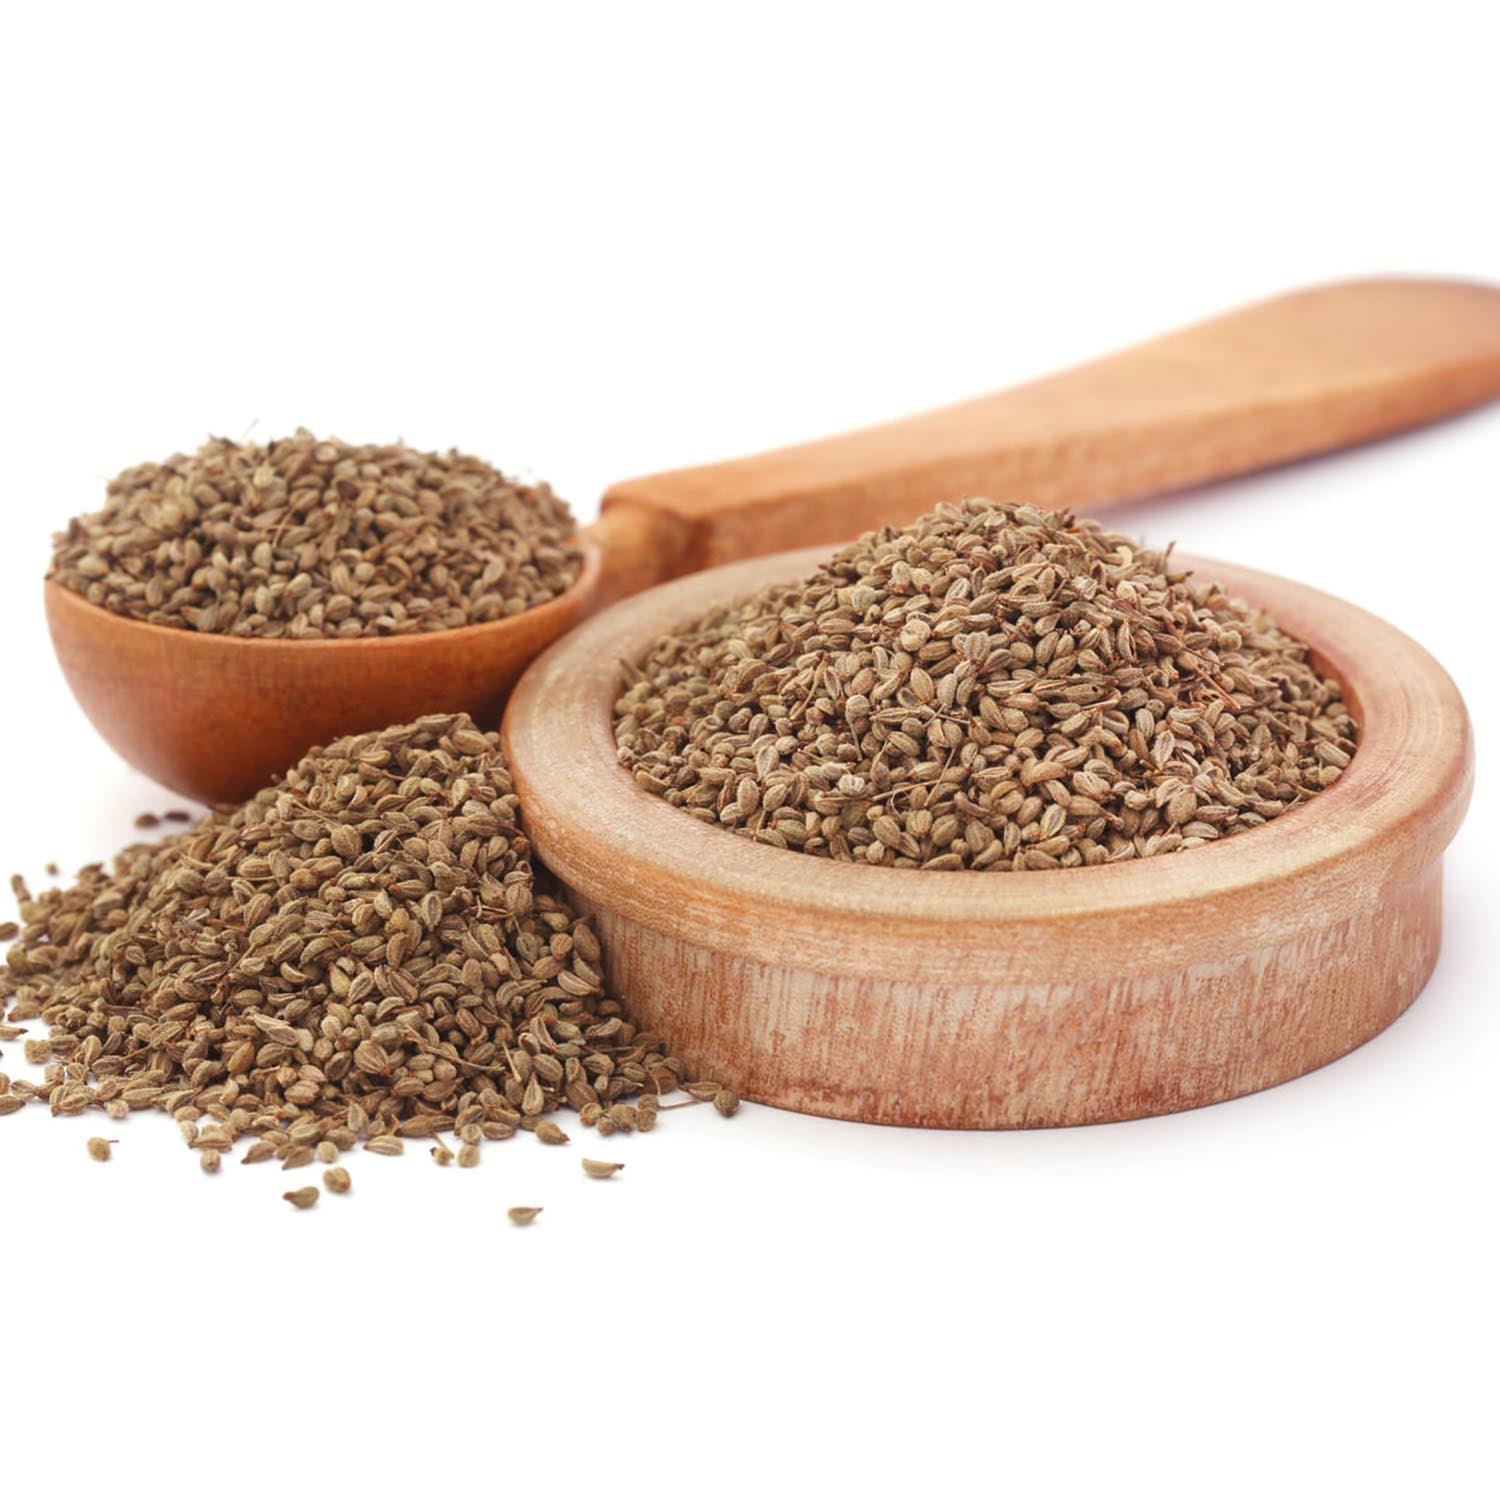 Milletamma’s Ajwain helps to relief from acidity and indigestion.   It helps to avoid nasal blockage and treats the common cold.  It acts as a strong fungicide and germicide. So, it is the best rescue for injury.  It helps to halt premature greying of hair.